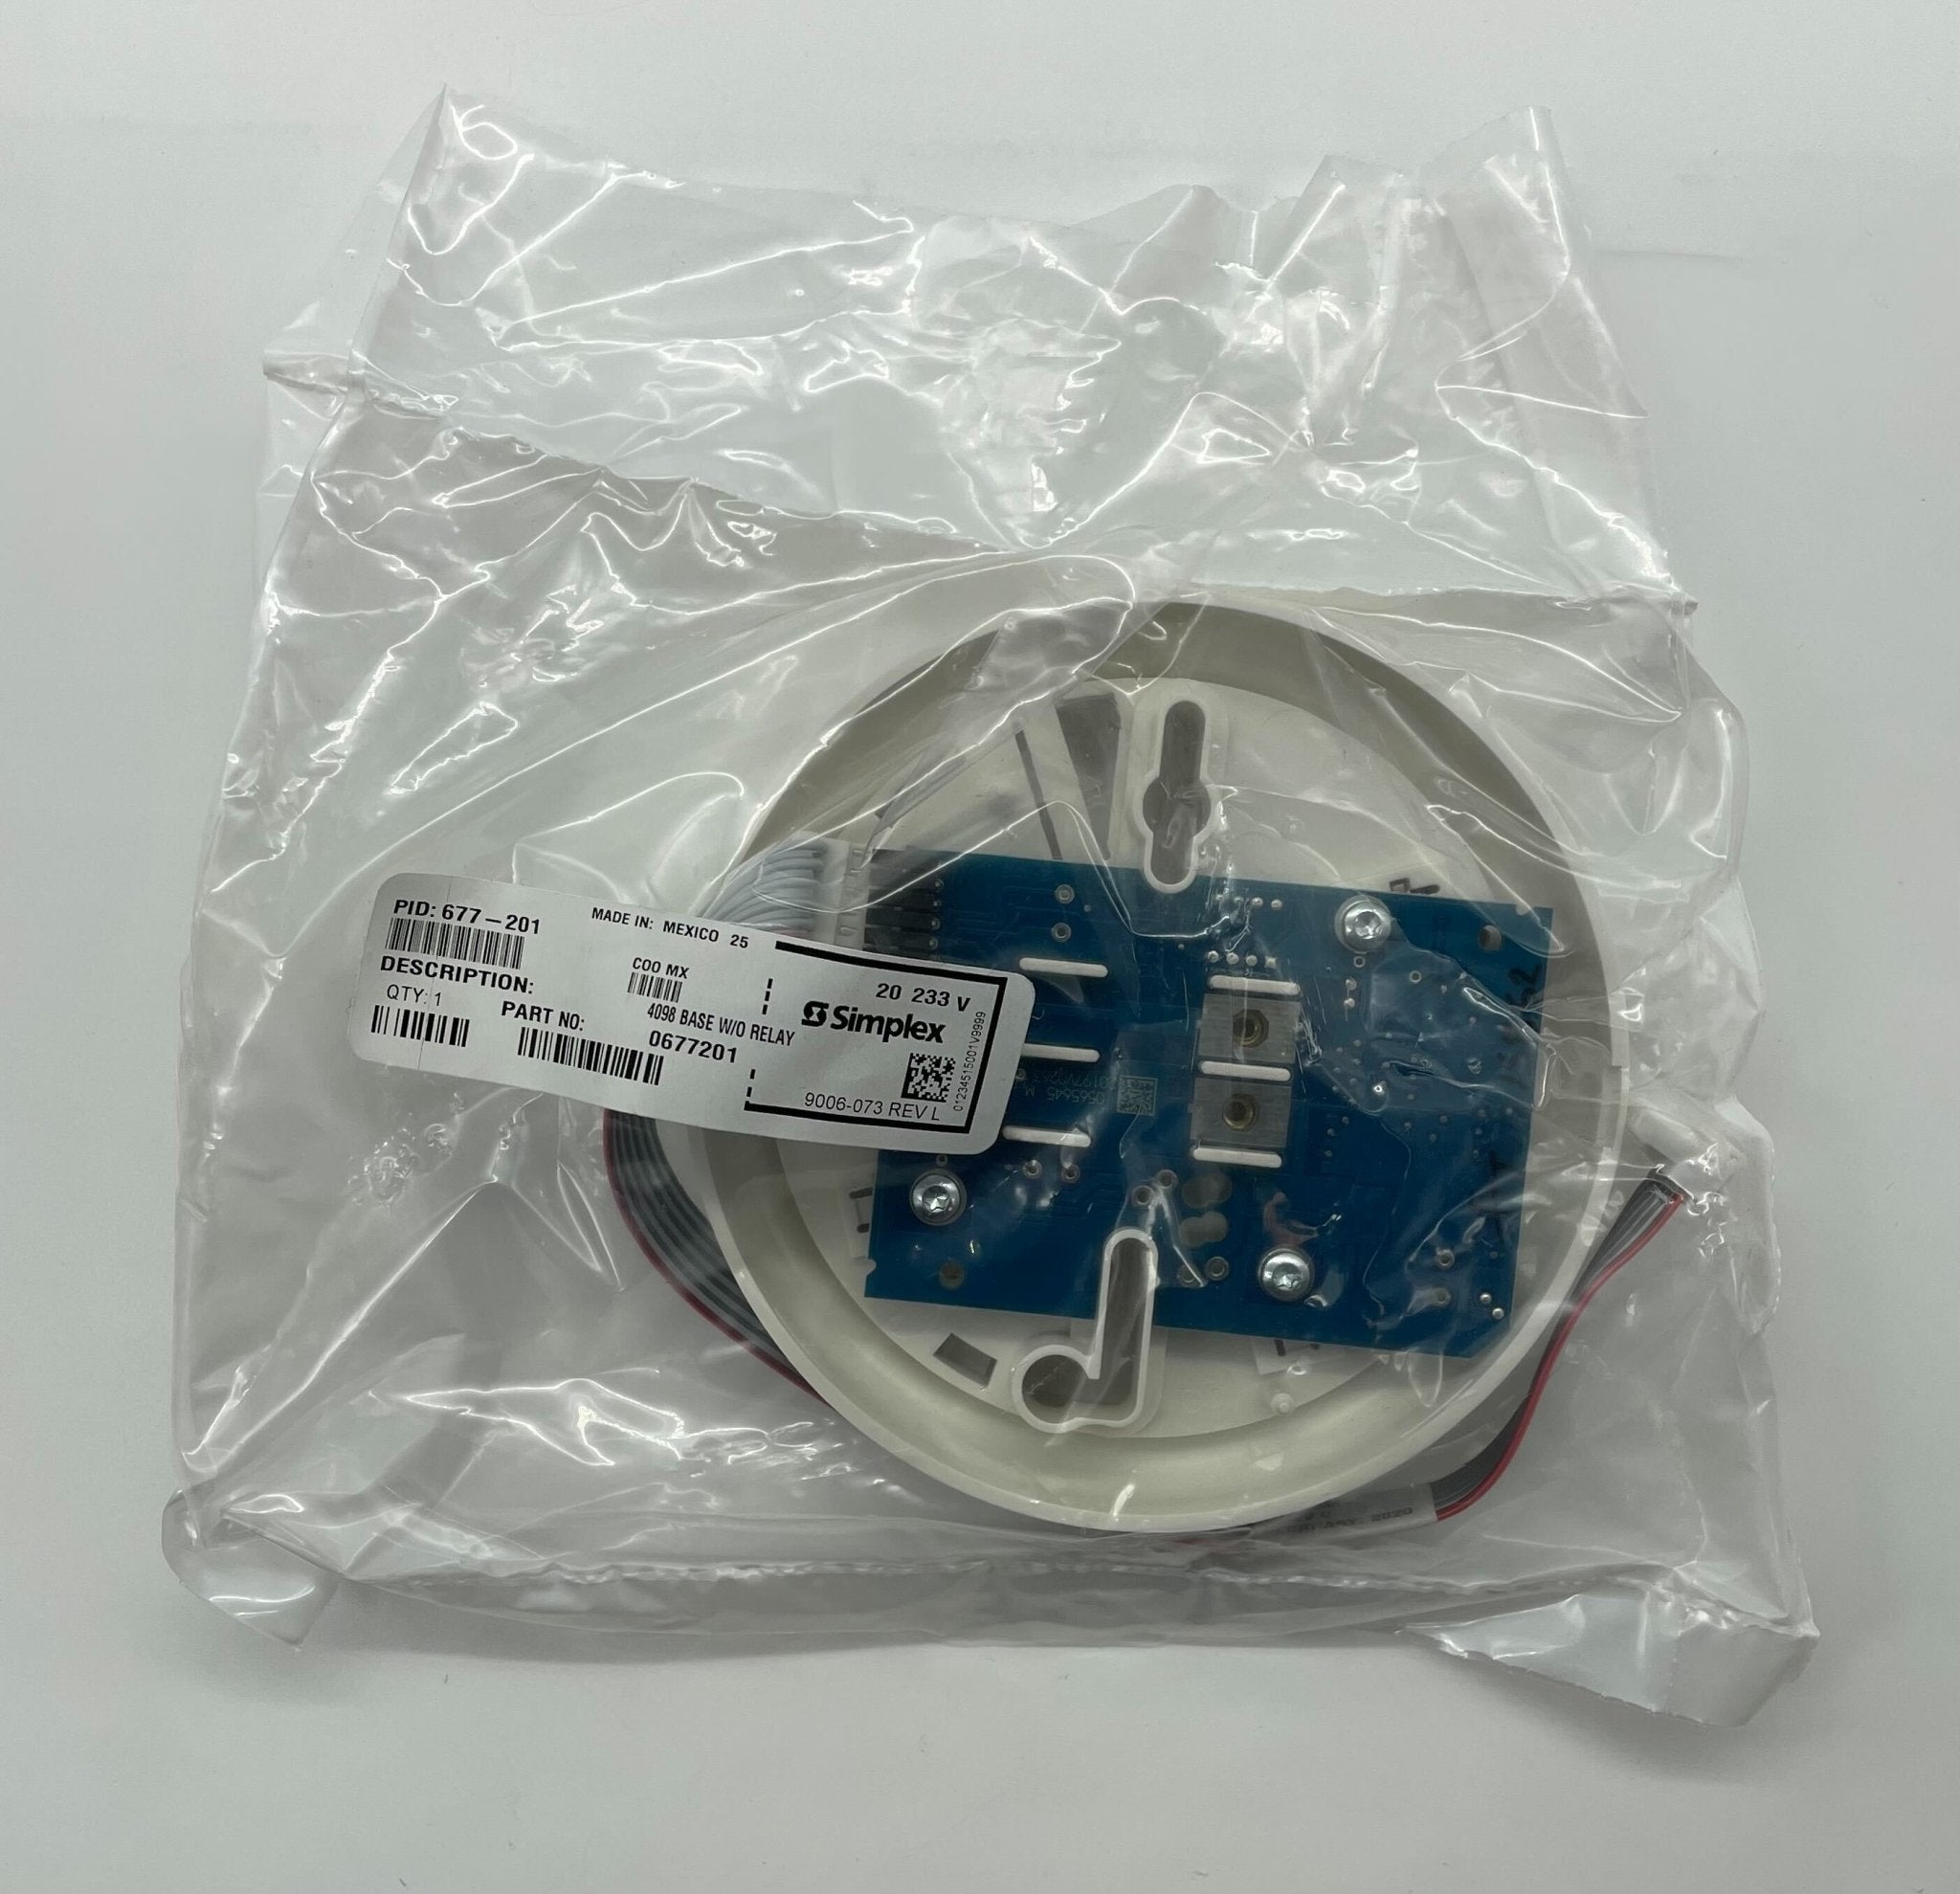 Simplex 677-201 Sensor Base With Relay - The Fire Alarm Supplier